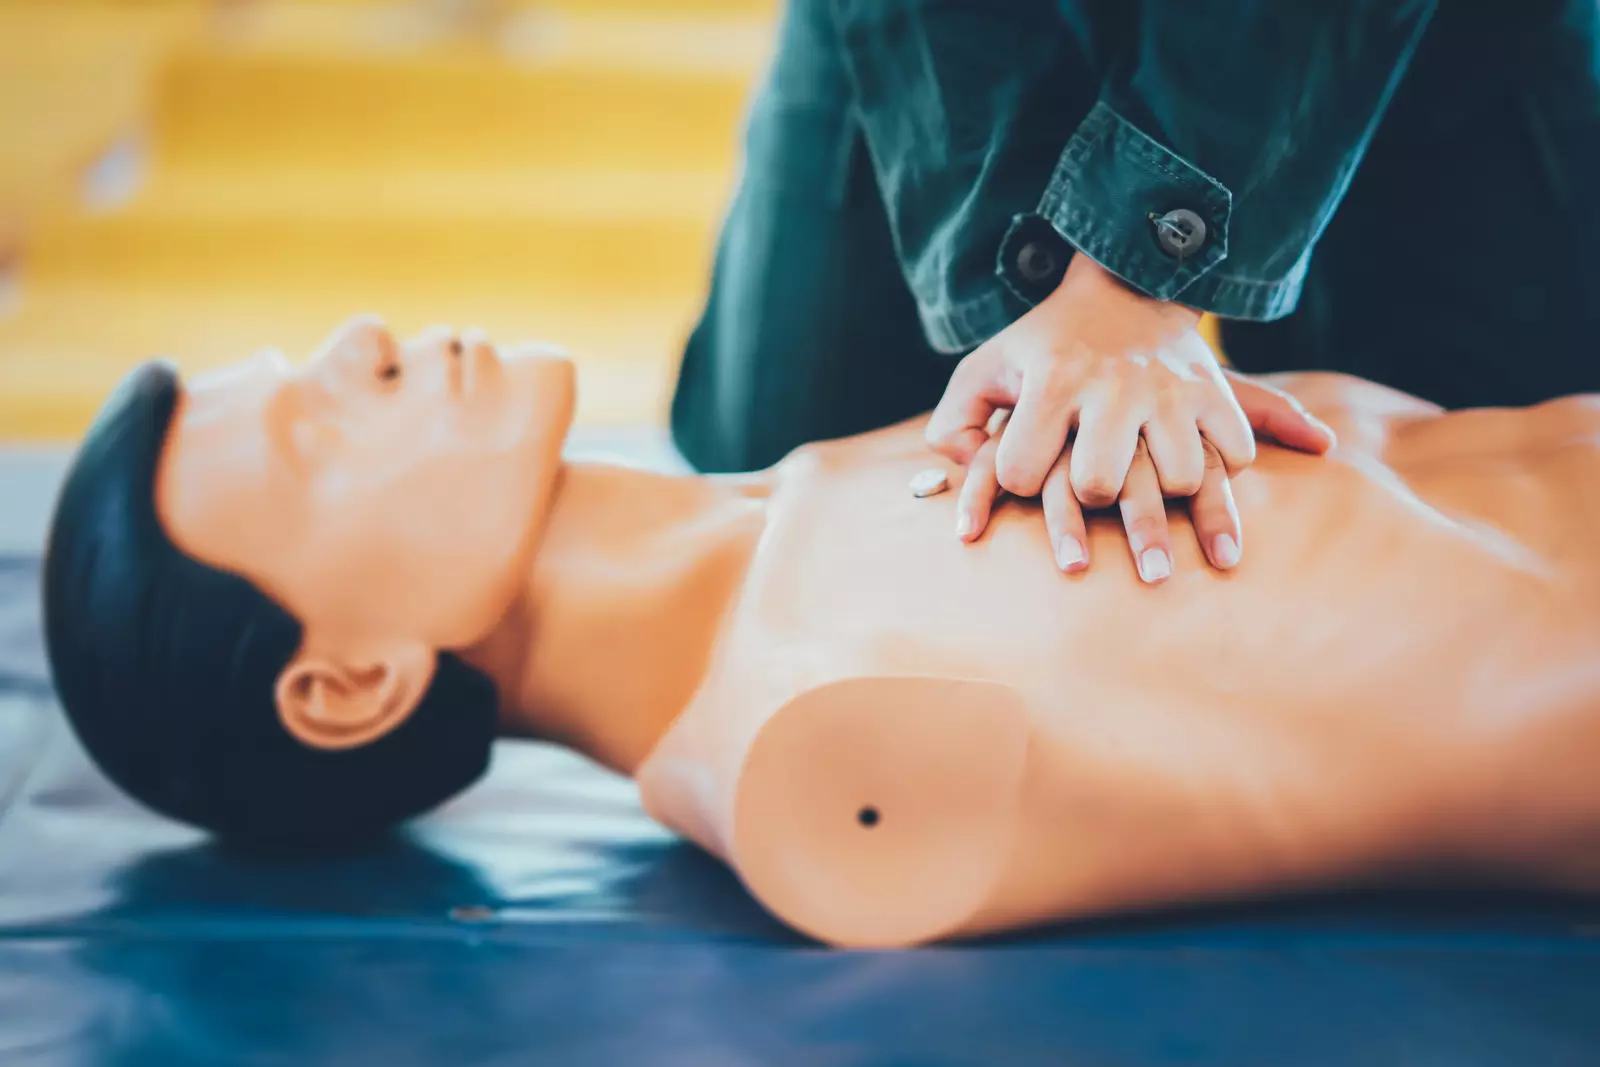 Person performing CPR on a training dummy.